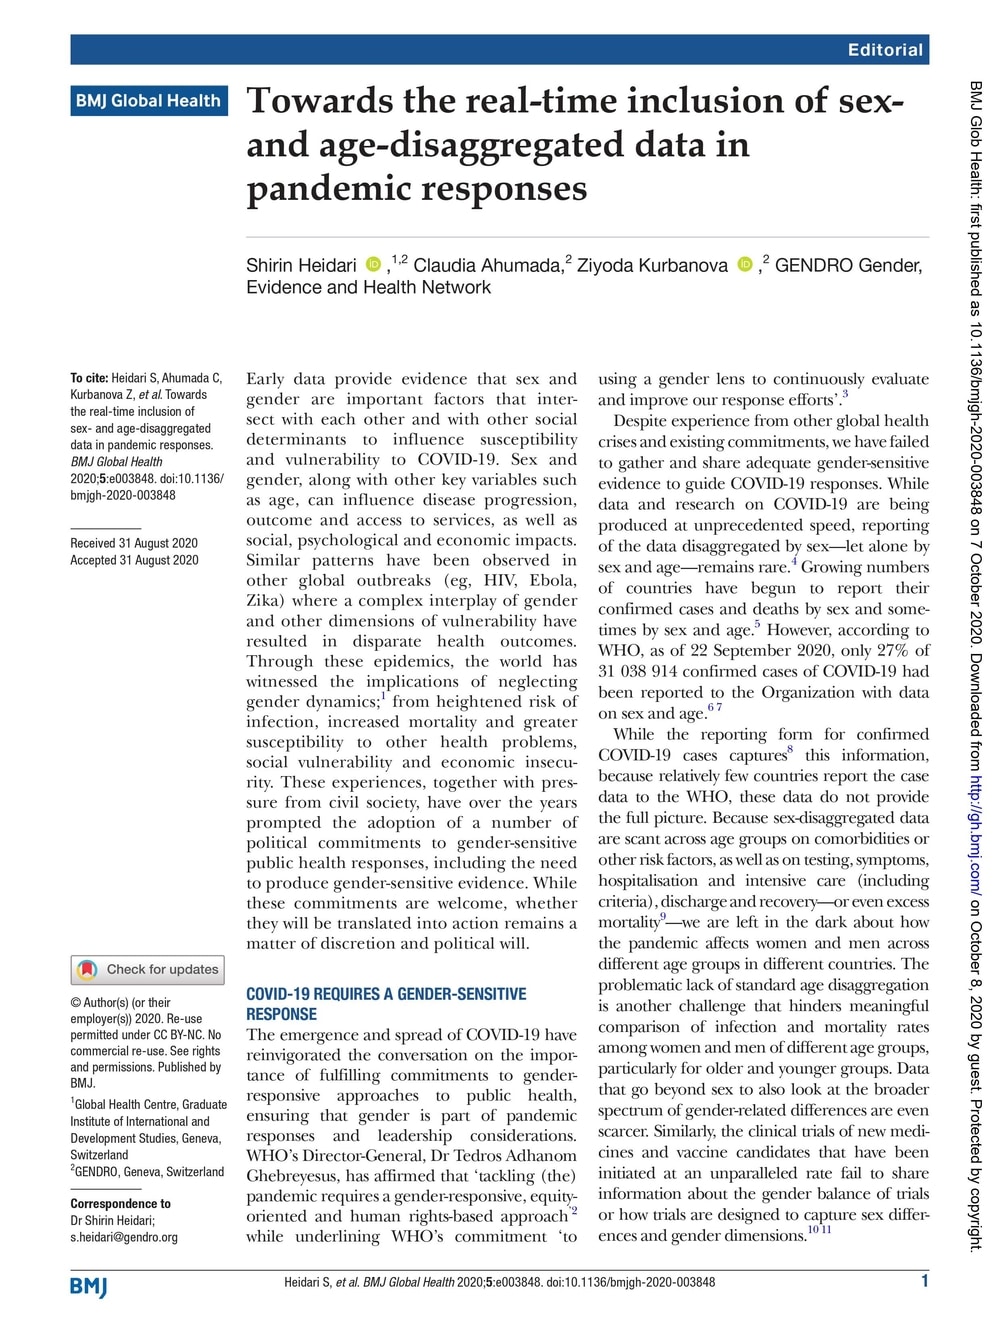 sex- and age-disaggregated data in pandemic responses